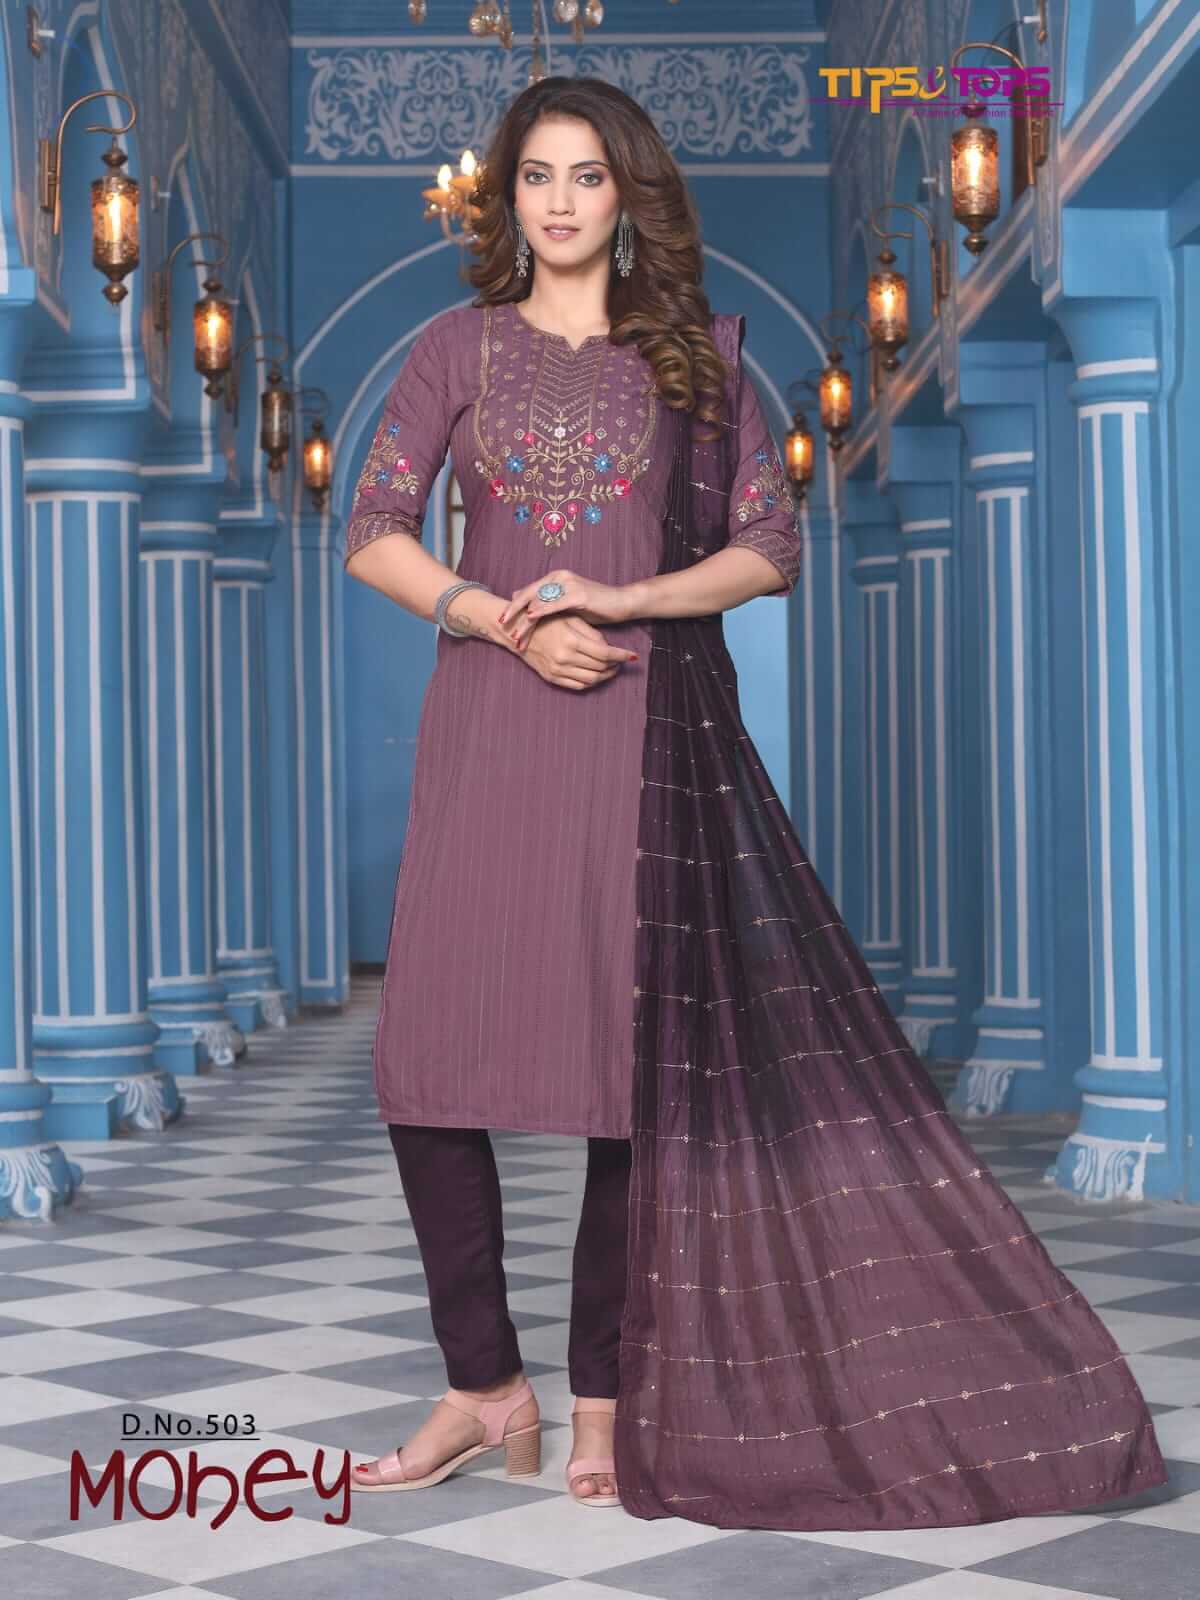 Tips and Tops Mohey vol 5 Embroidery Salwar Kameez Catalog collection 1